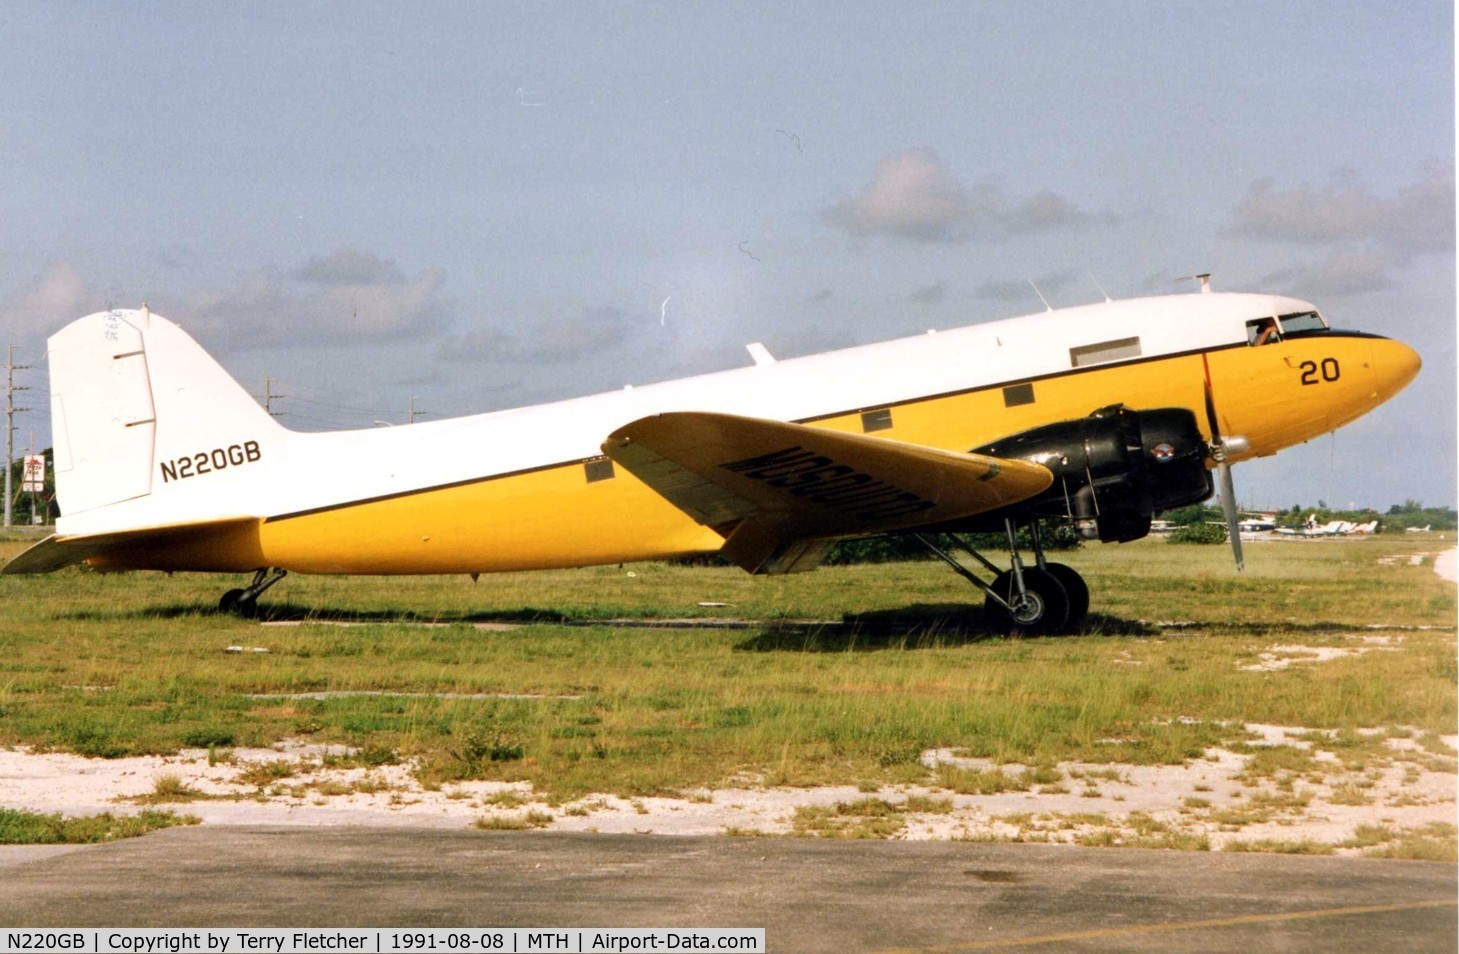 N220GB, 1942 Douglas DC3C 1830-94 C/N 4438, This DC3 sprayer was part of the Florida Mosquito Control when photographed at Marathon FL in 1991